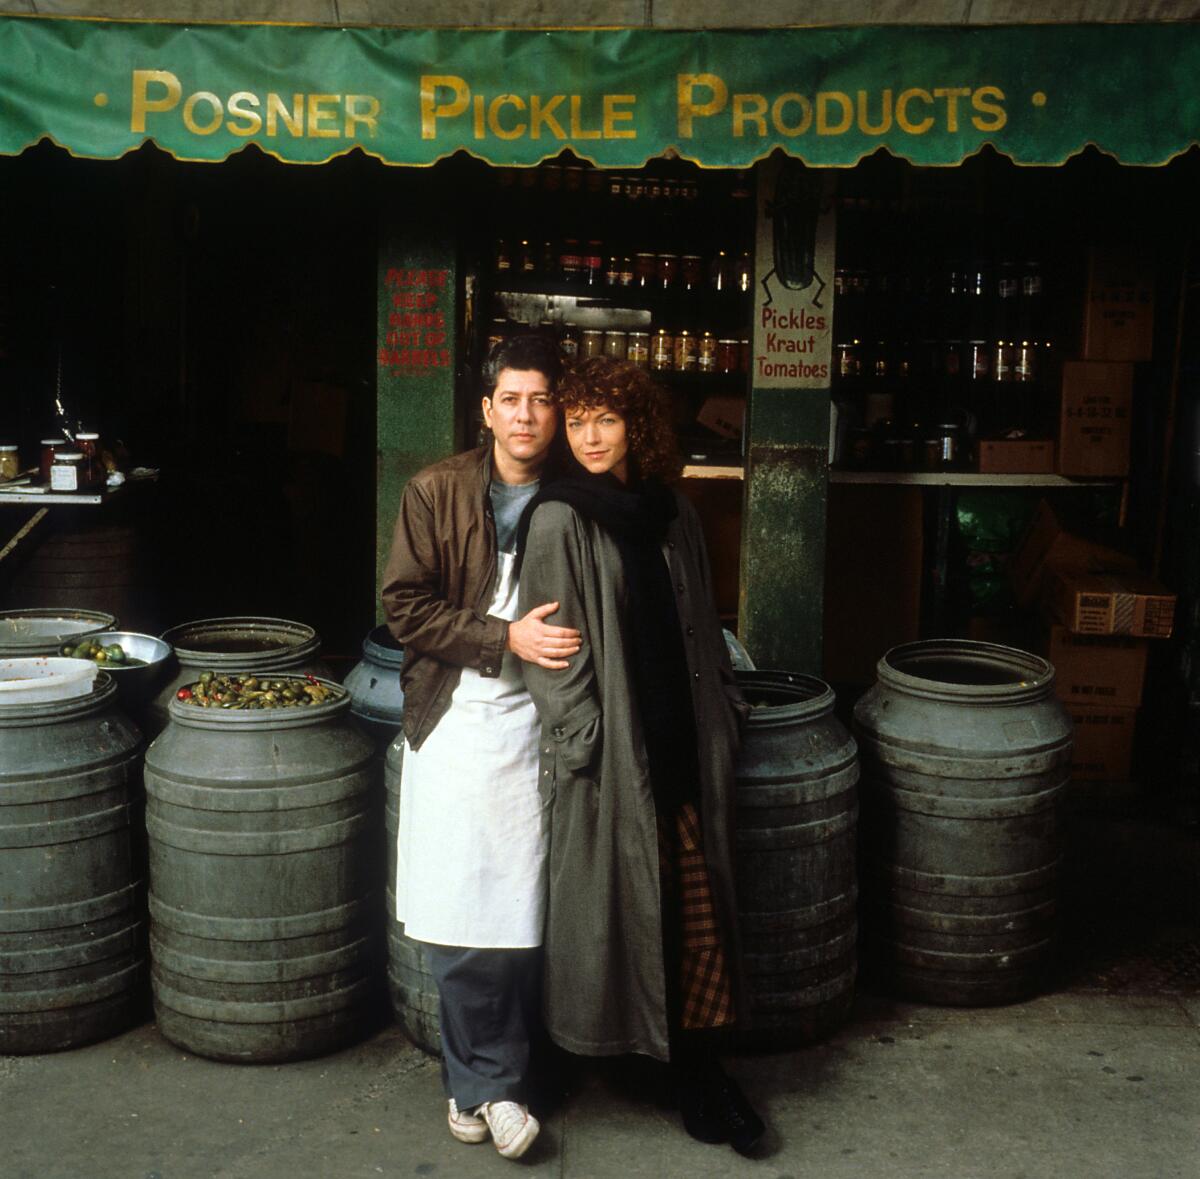 A man and a woman stand next to barrels in front of a pickle shop.